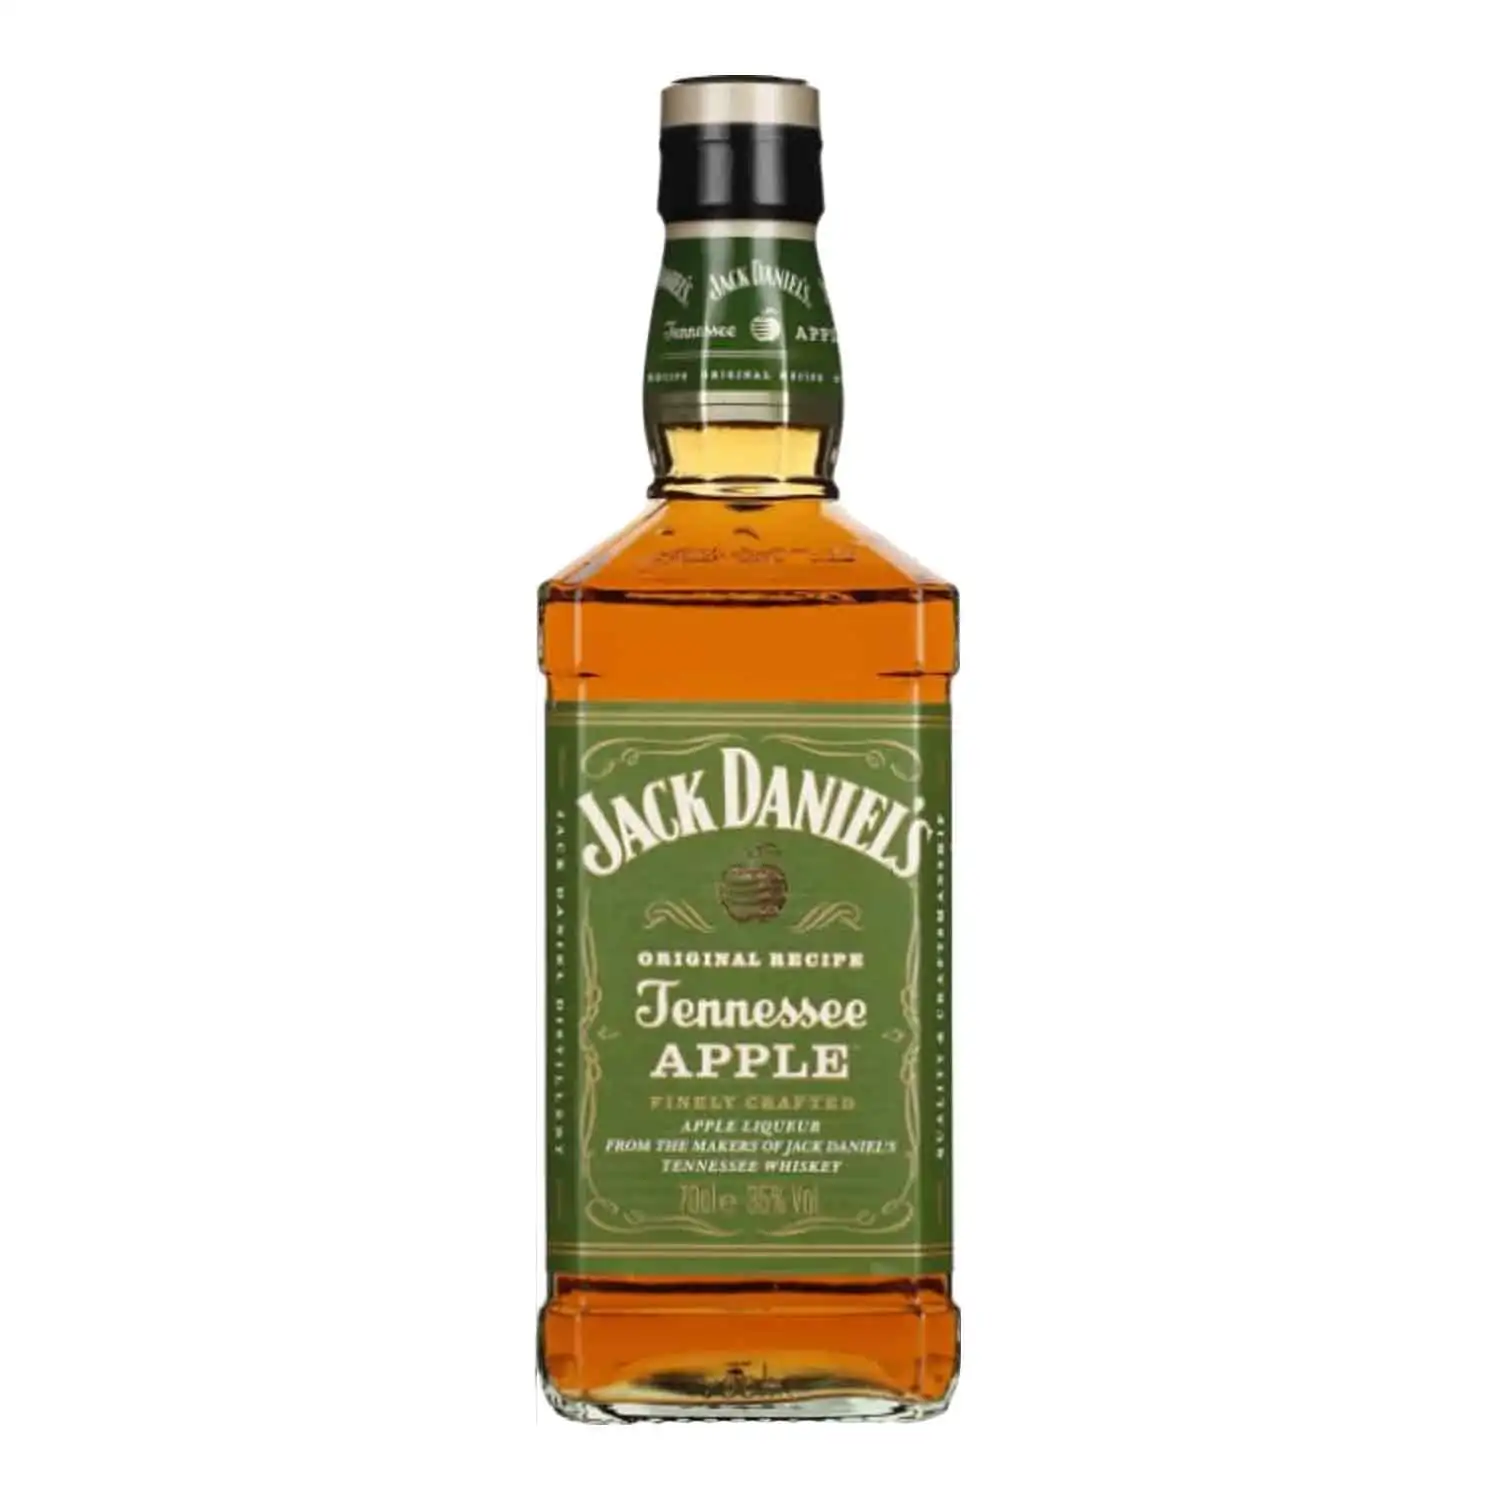 J. Daniel's tennessee apple 70cl Alc 35% - Buy at Real Tobacco